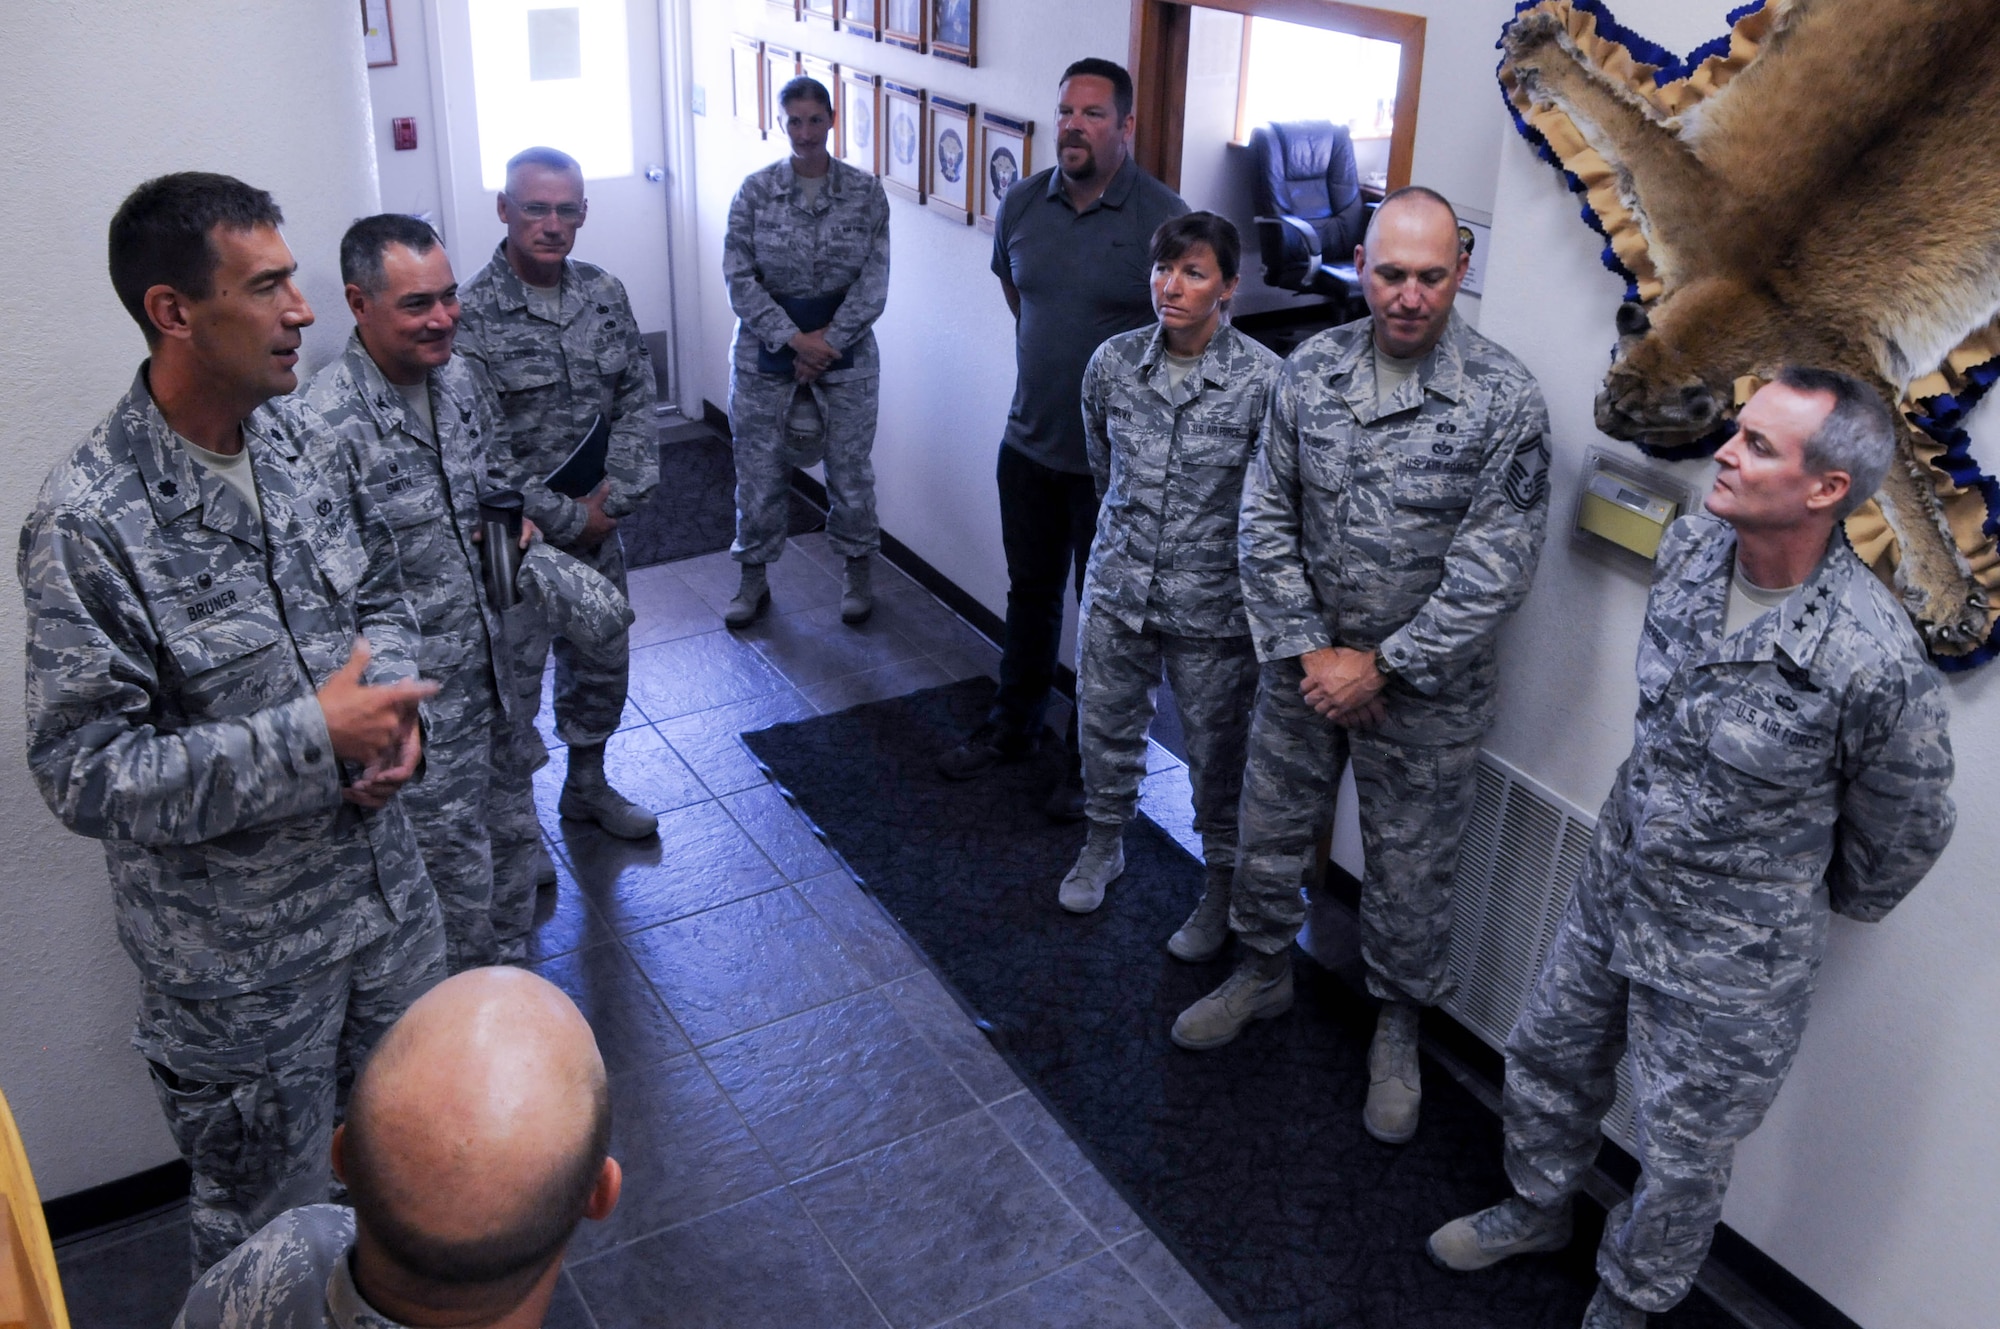 U.S. Air Force Lt. Gen. Darryl Roberson, commander of Air Education and Training Command, far right, visits with members of the 173rd Civil Engineer Squadron at Kingsley Field, Ore., July 7, 2016. Roberson had a firsthand look at the unit's mission and capabilities, which include training F-15C fighter pilots. (U.S. Air National Guard photo by Staff Sgt. Penny Snoozy)